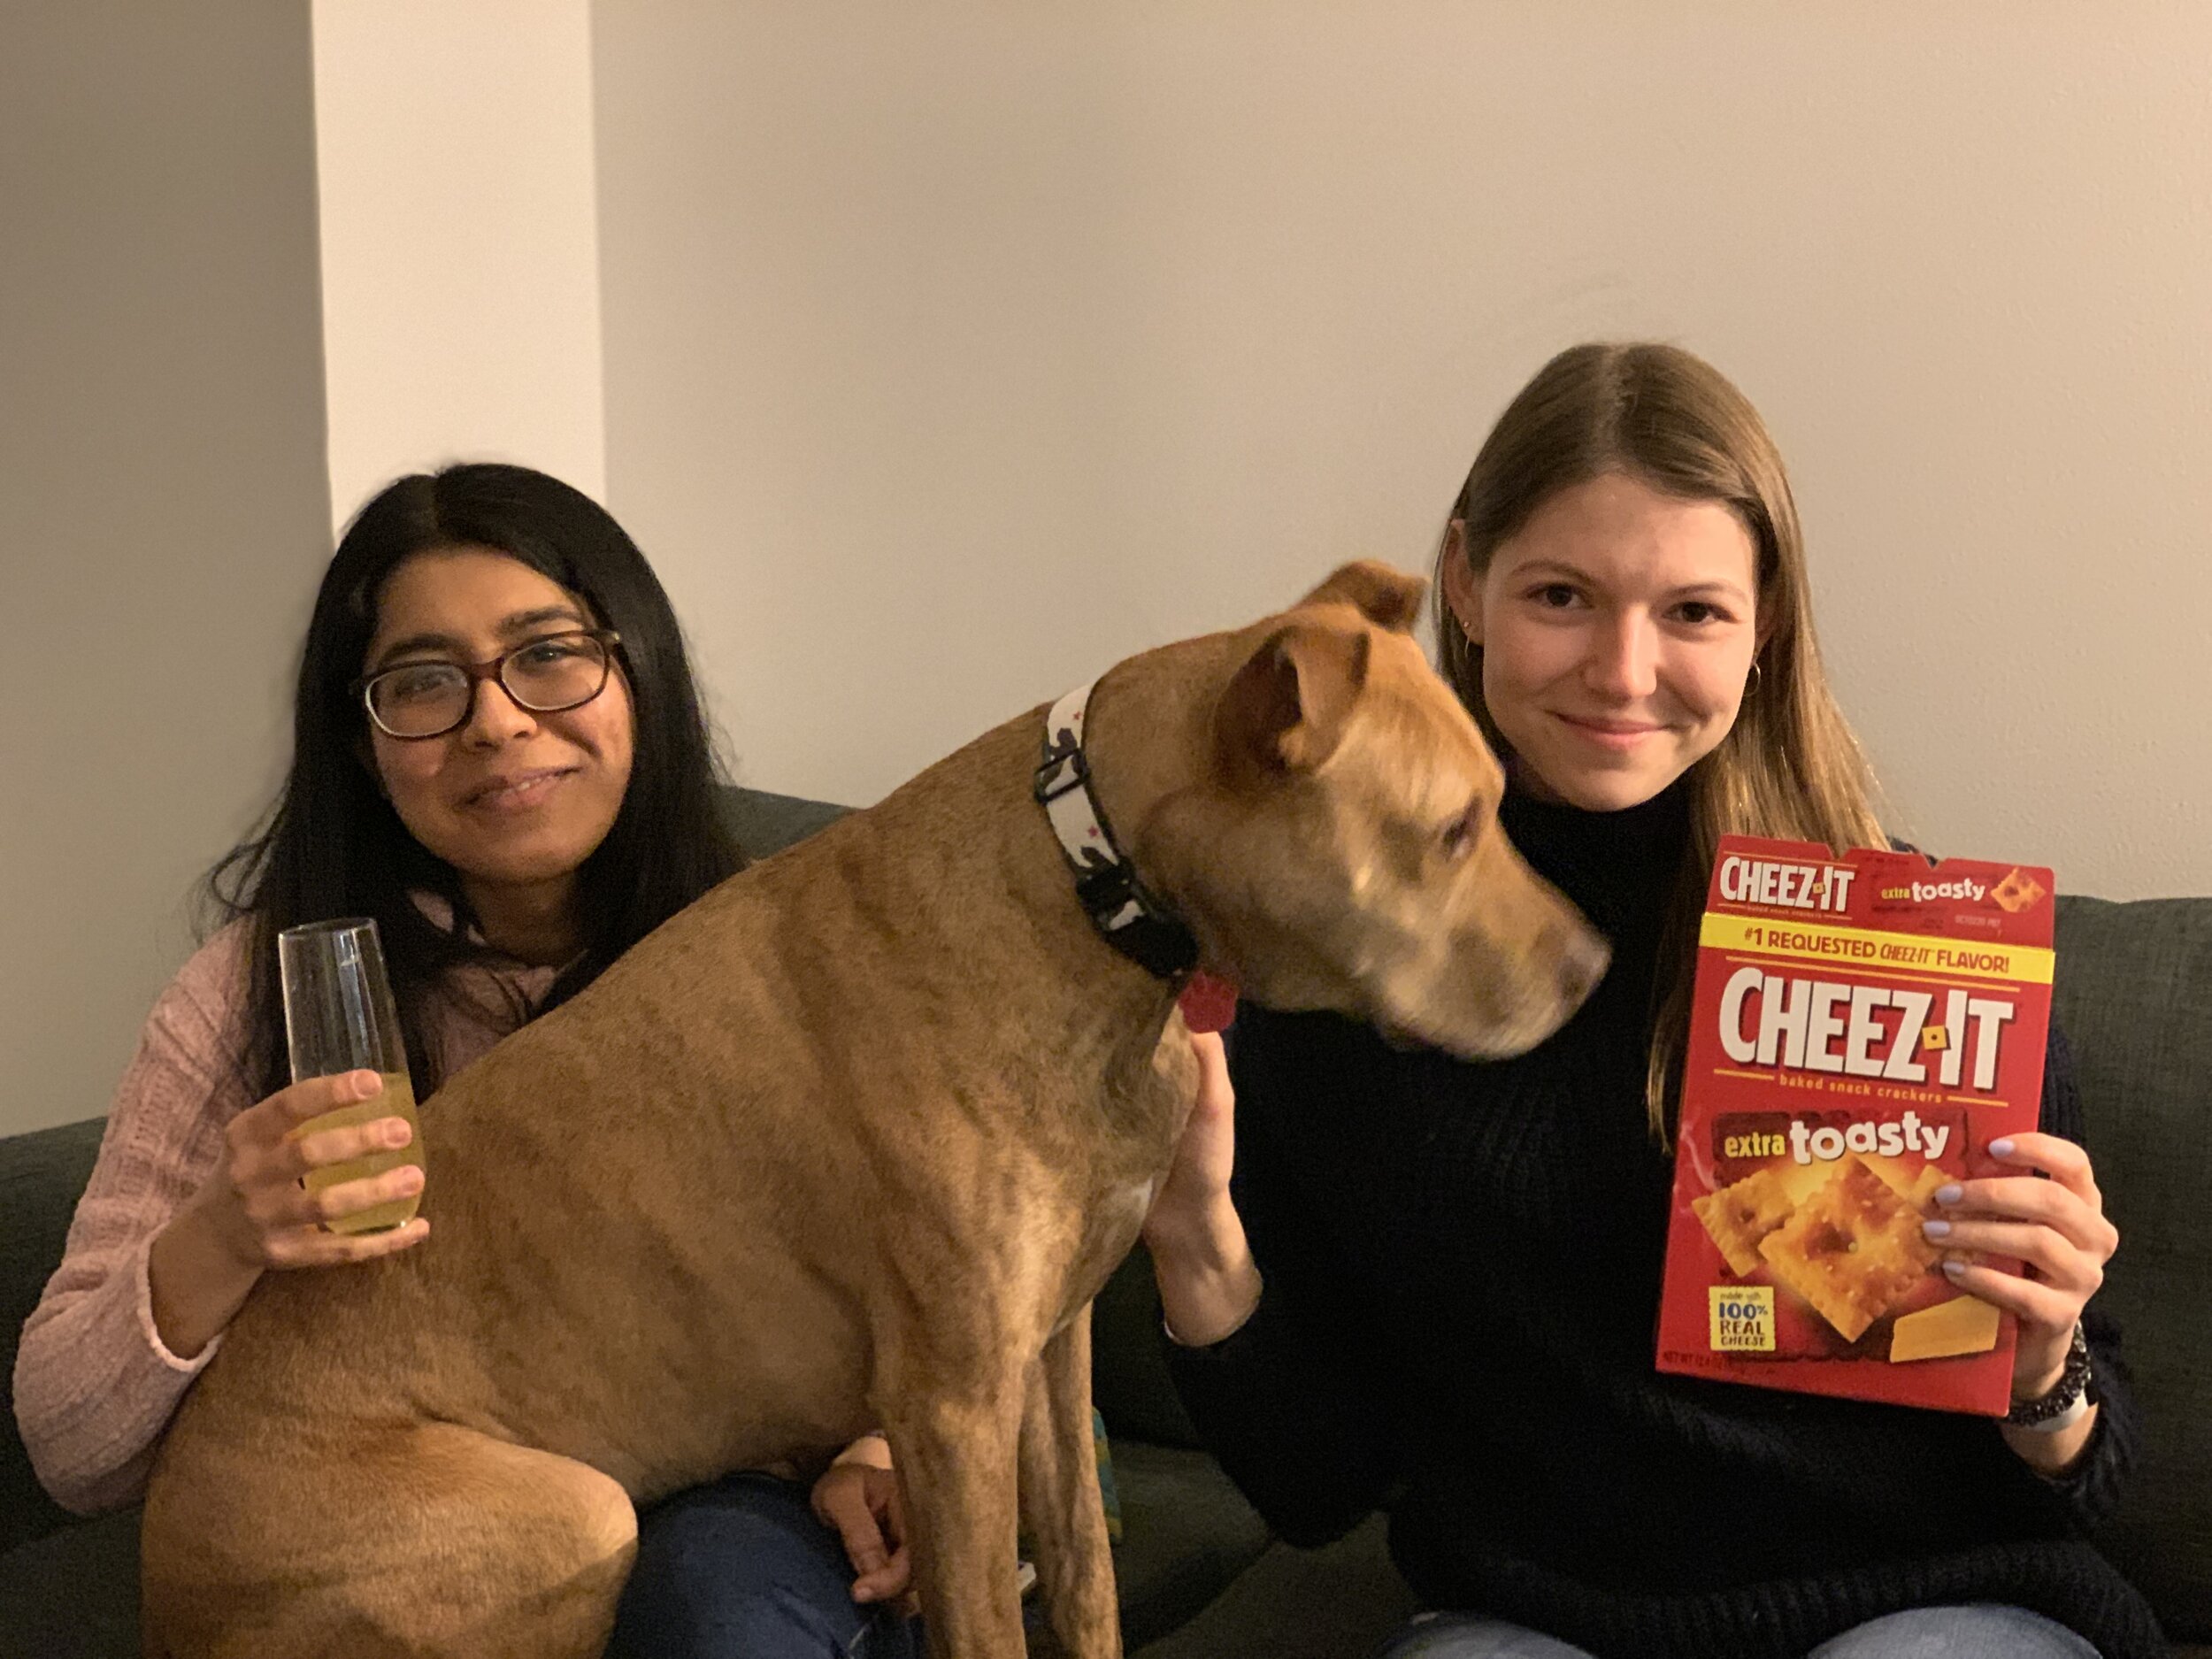 Our official sponsor 'Cheez-IT'